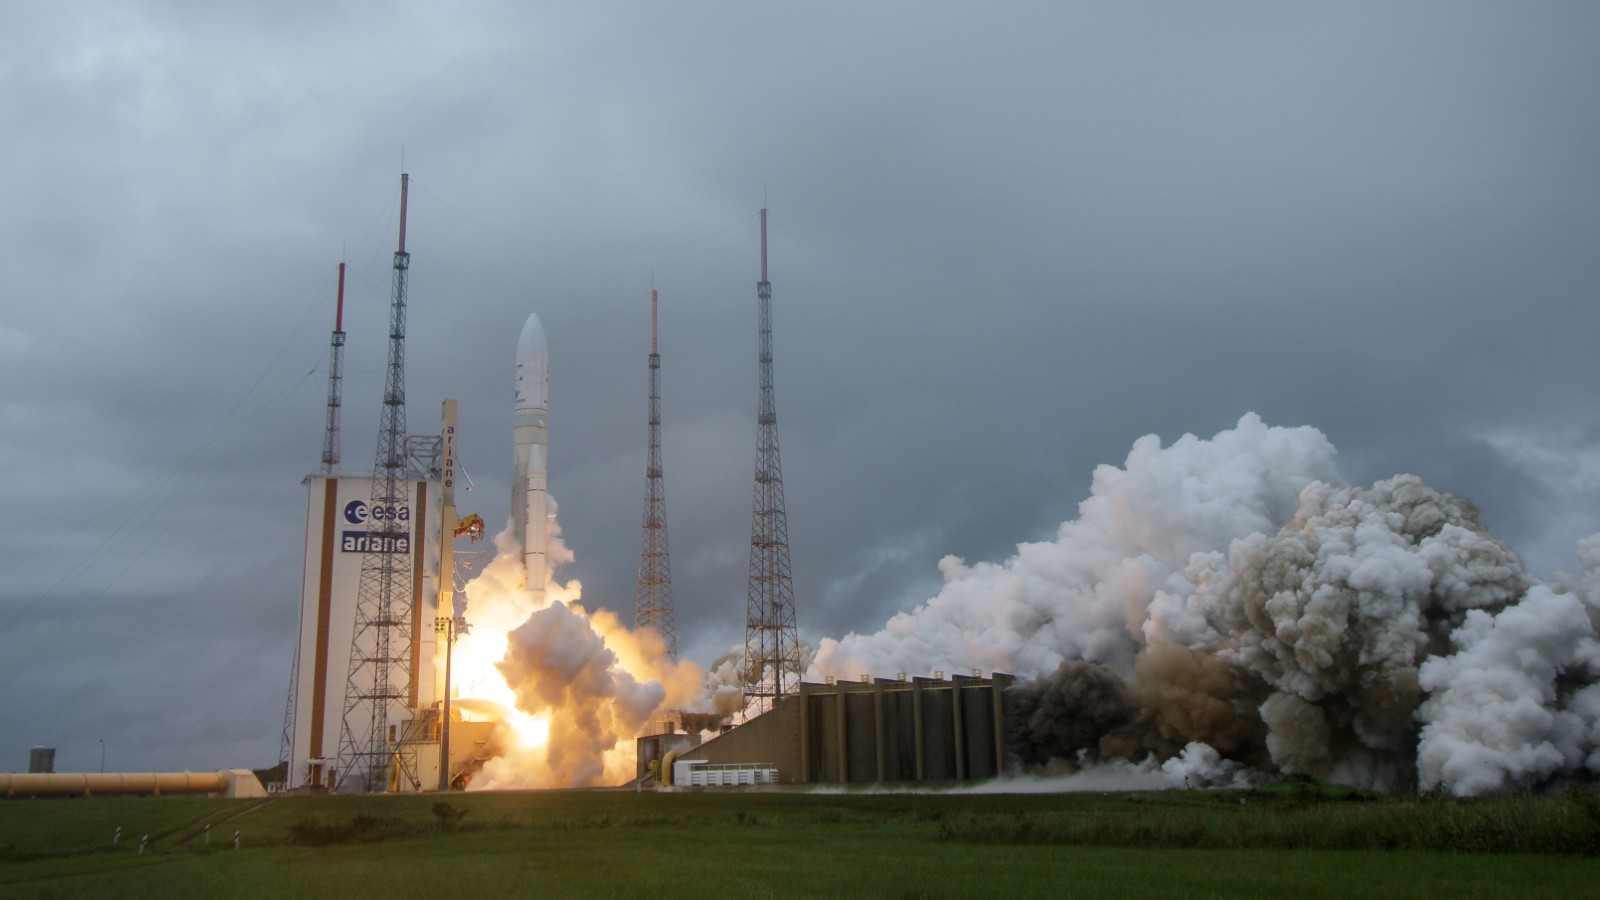 A rocket launches from its pad as smoke and steam billow out, against an overcast sky, marked with the european space agency's logo.